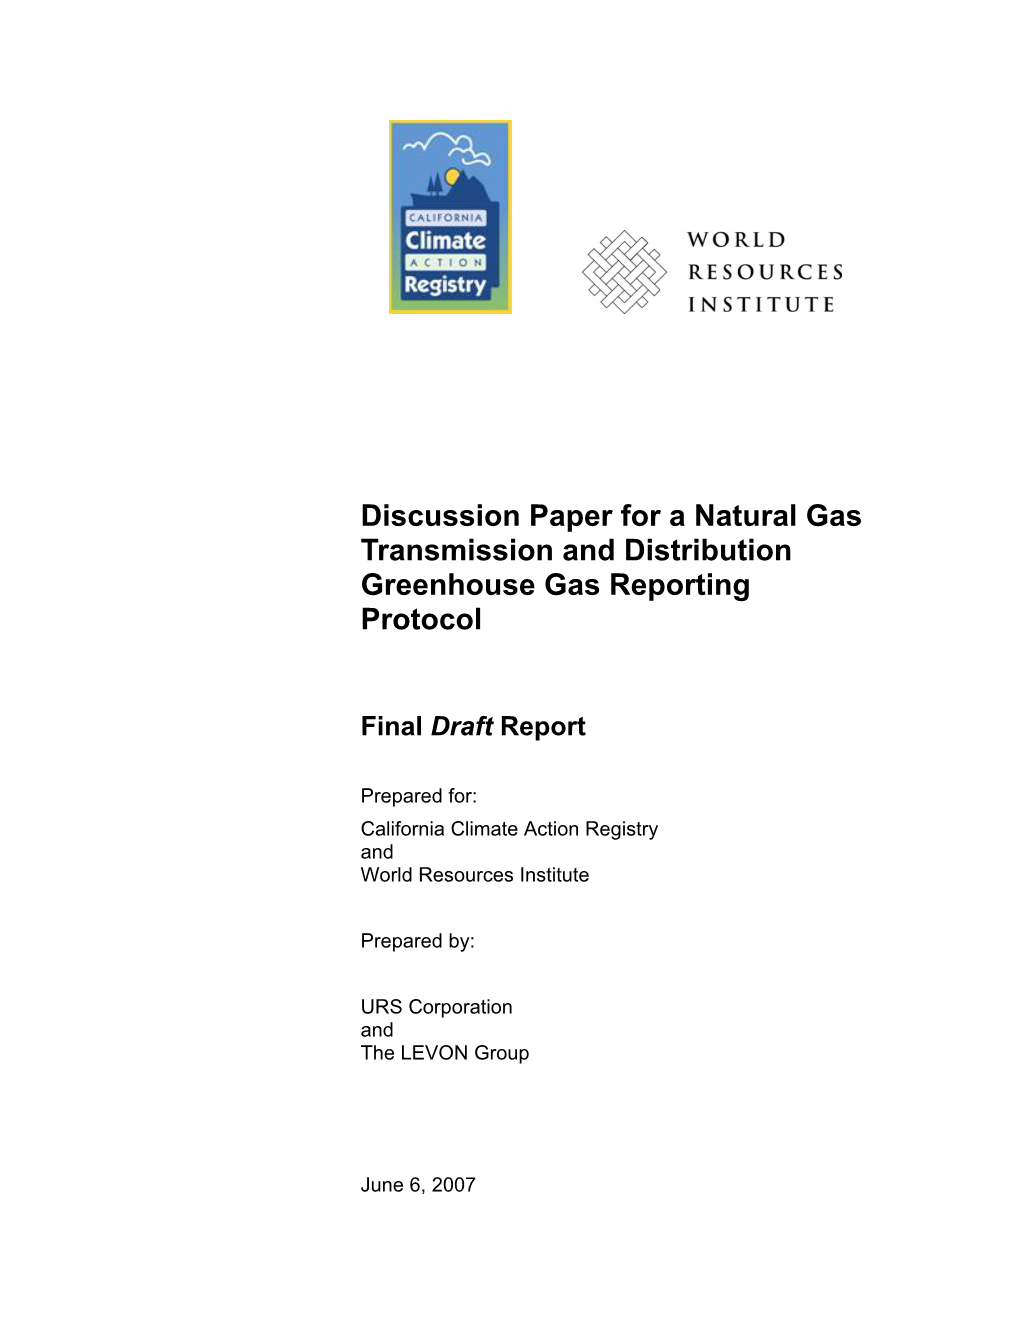 Greehouse Gas Reporting Protocol for Natural Gas Transmission And